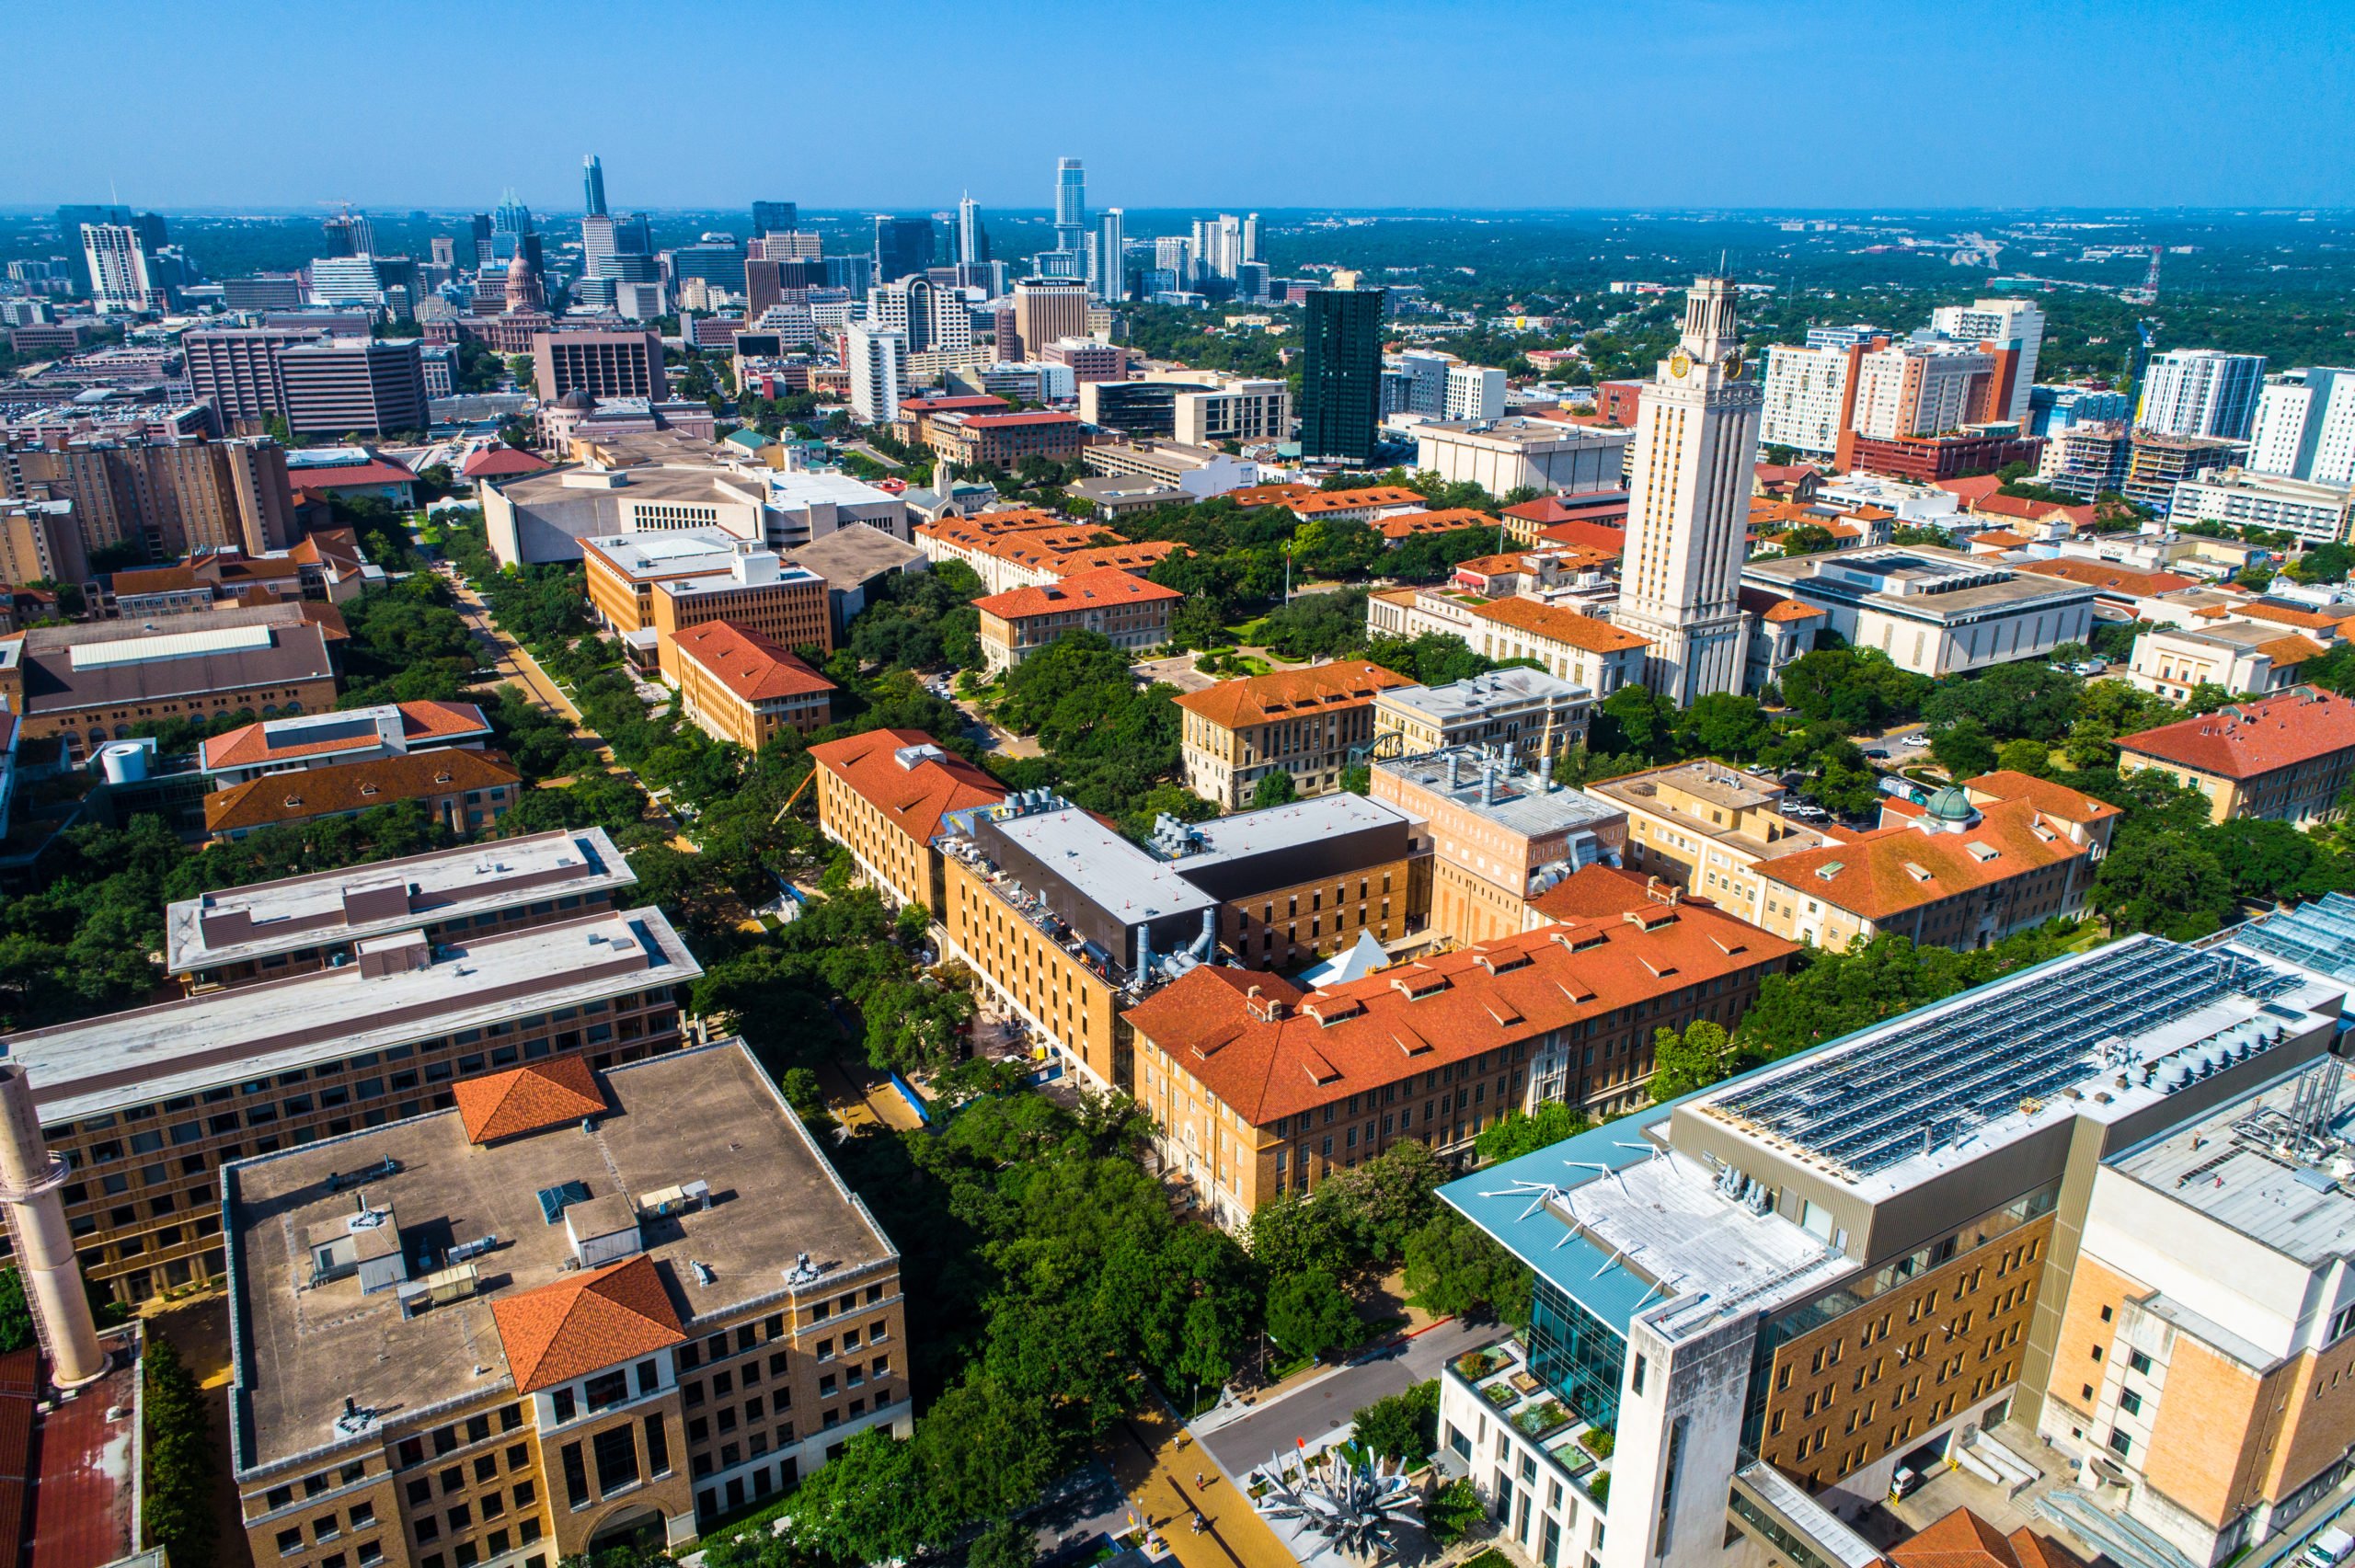 An aerial shot of the University of Texas at Austin campus, looking out also over the apartment buildings and high-rises around it.